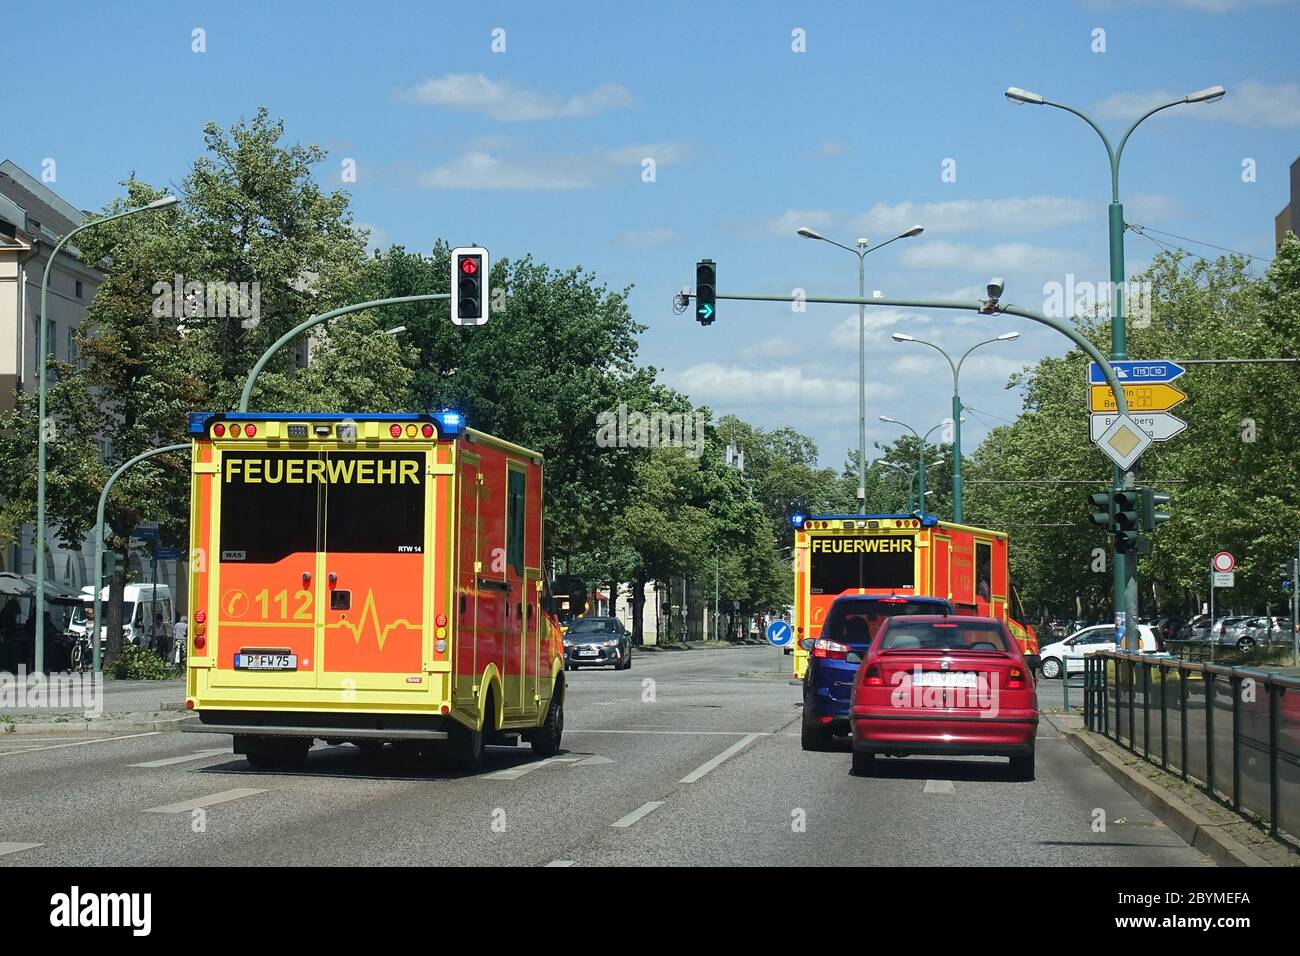 08.06.2019, Berlin, Brandenburg, Germany - Ambulance and emergency doctor of the fire department on duty. 00S190608D067CAROEX.JPG [MODEL RELEASE: NO, Stock Photo